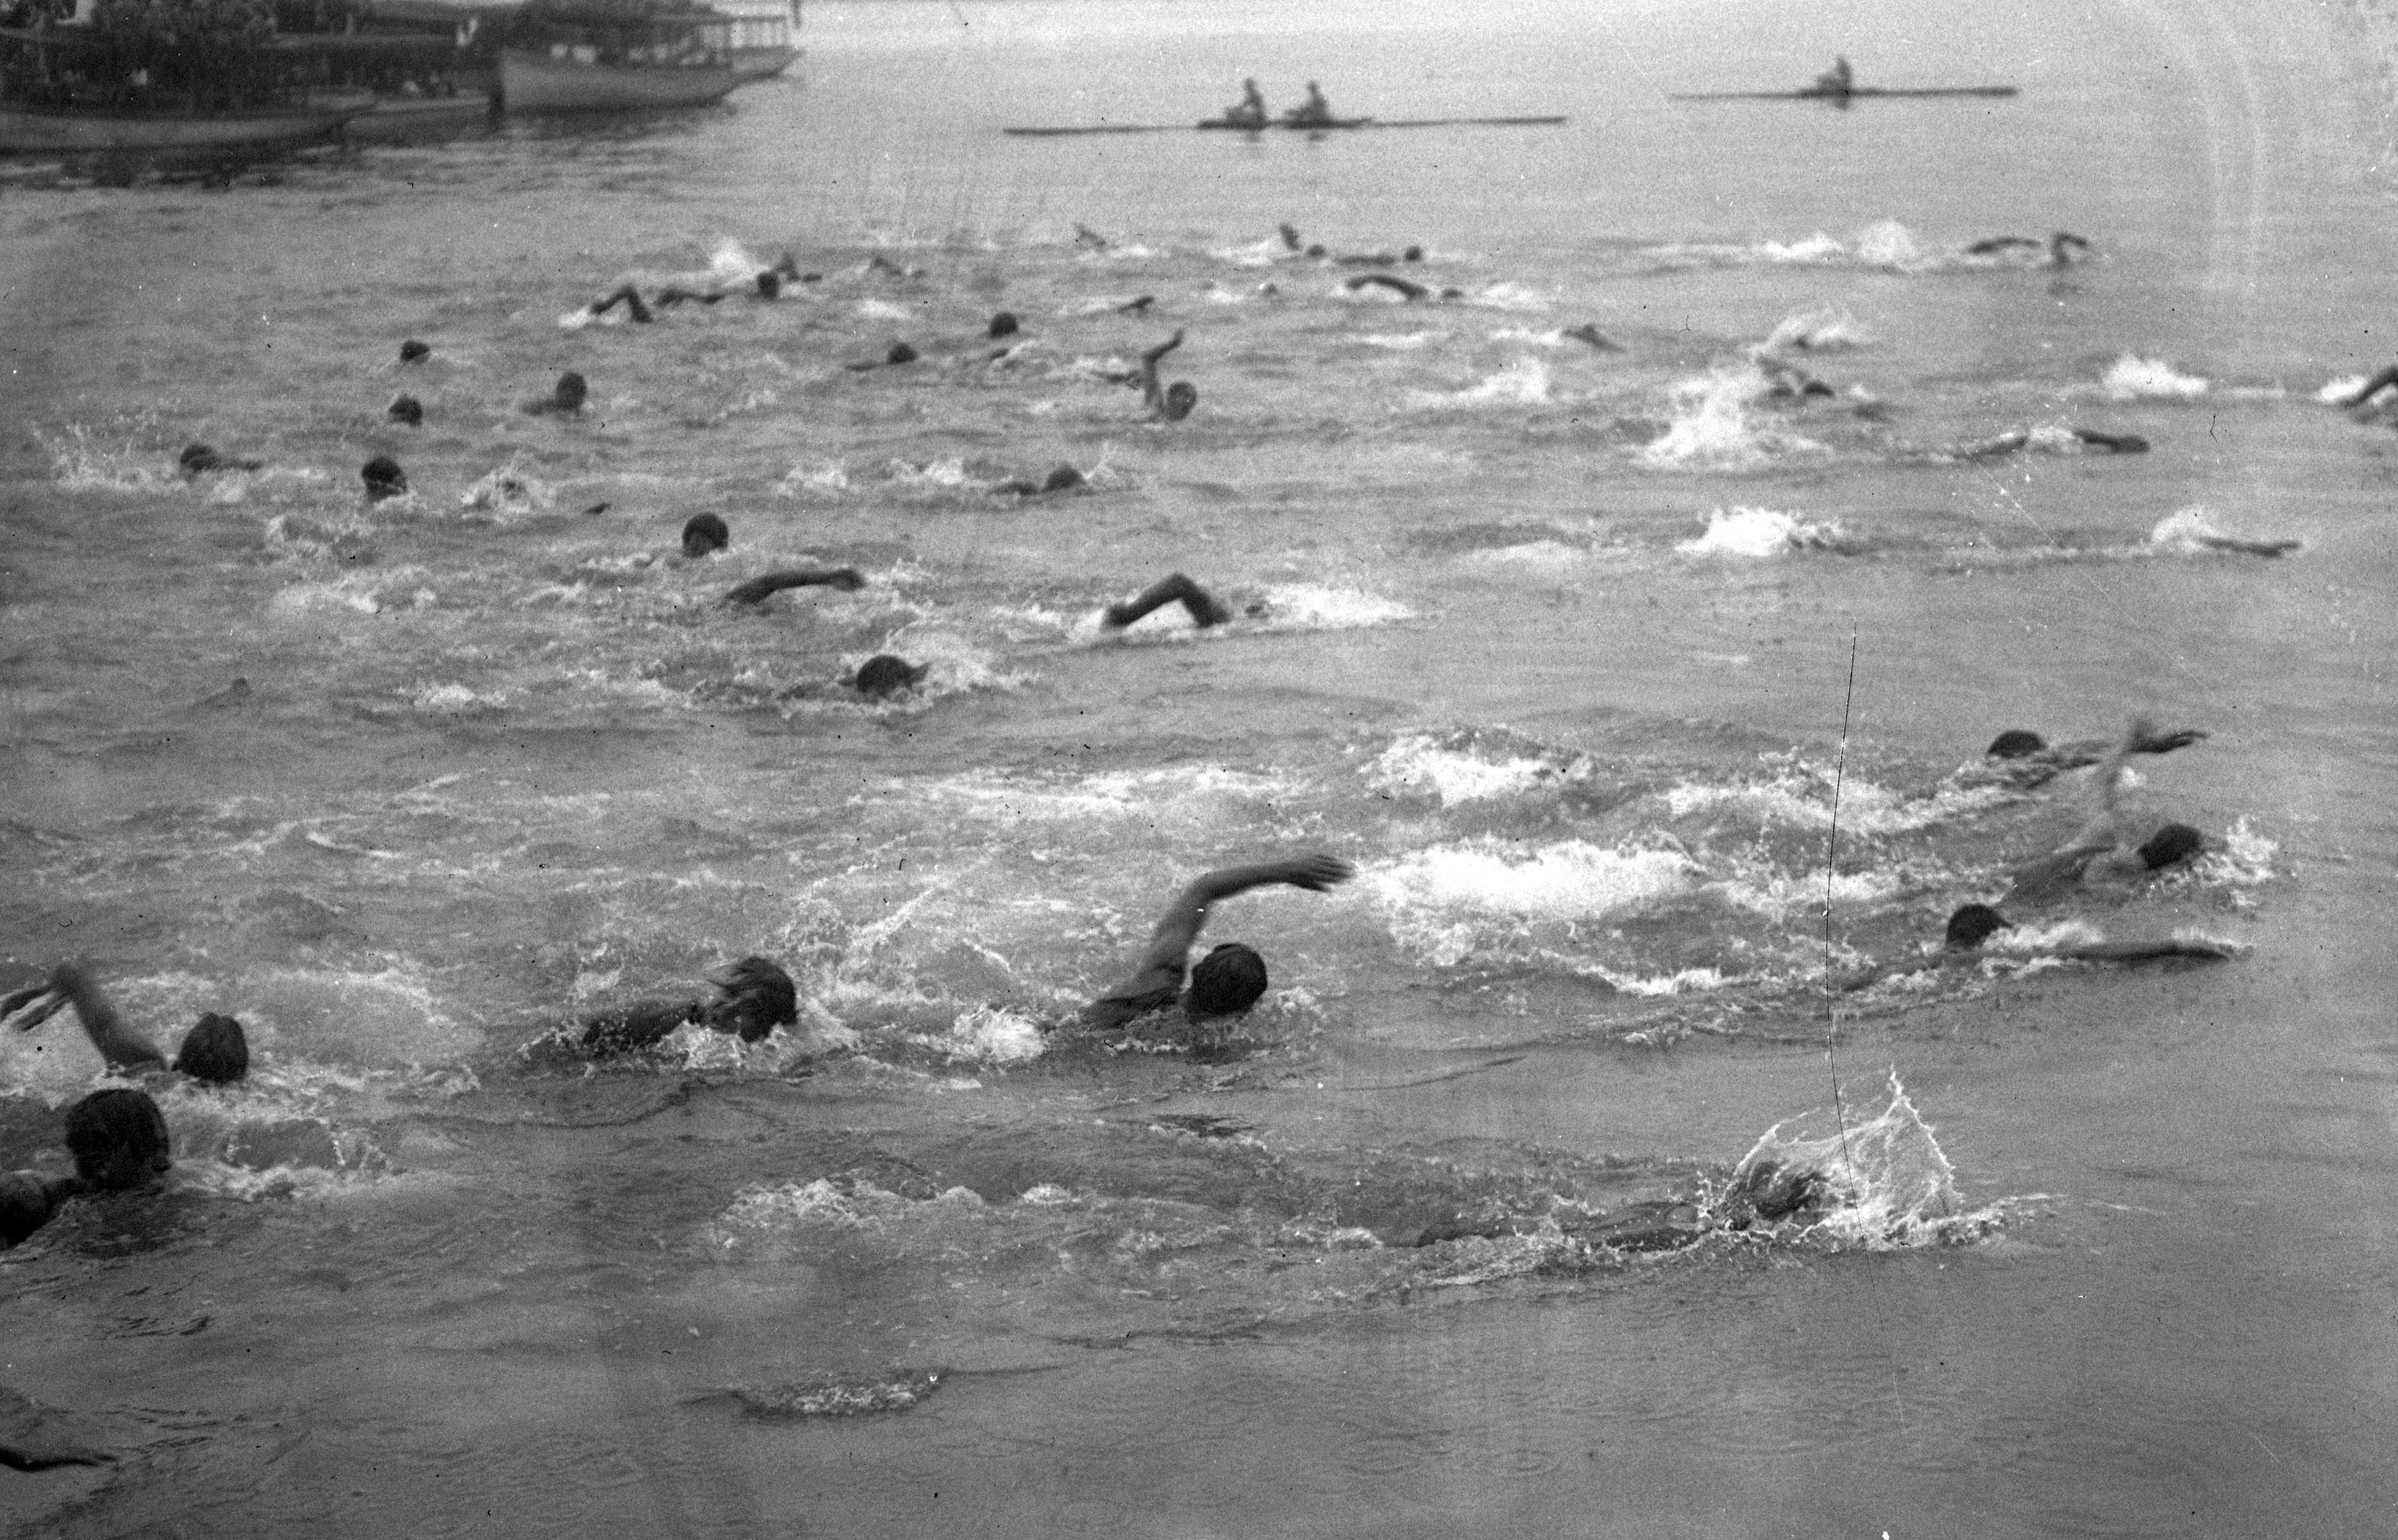 In the early 20th century, the Chicago River Swim was an annual event that drew thousands of spectators